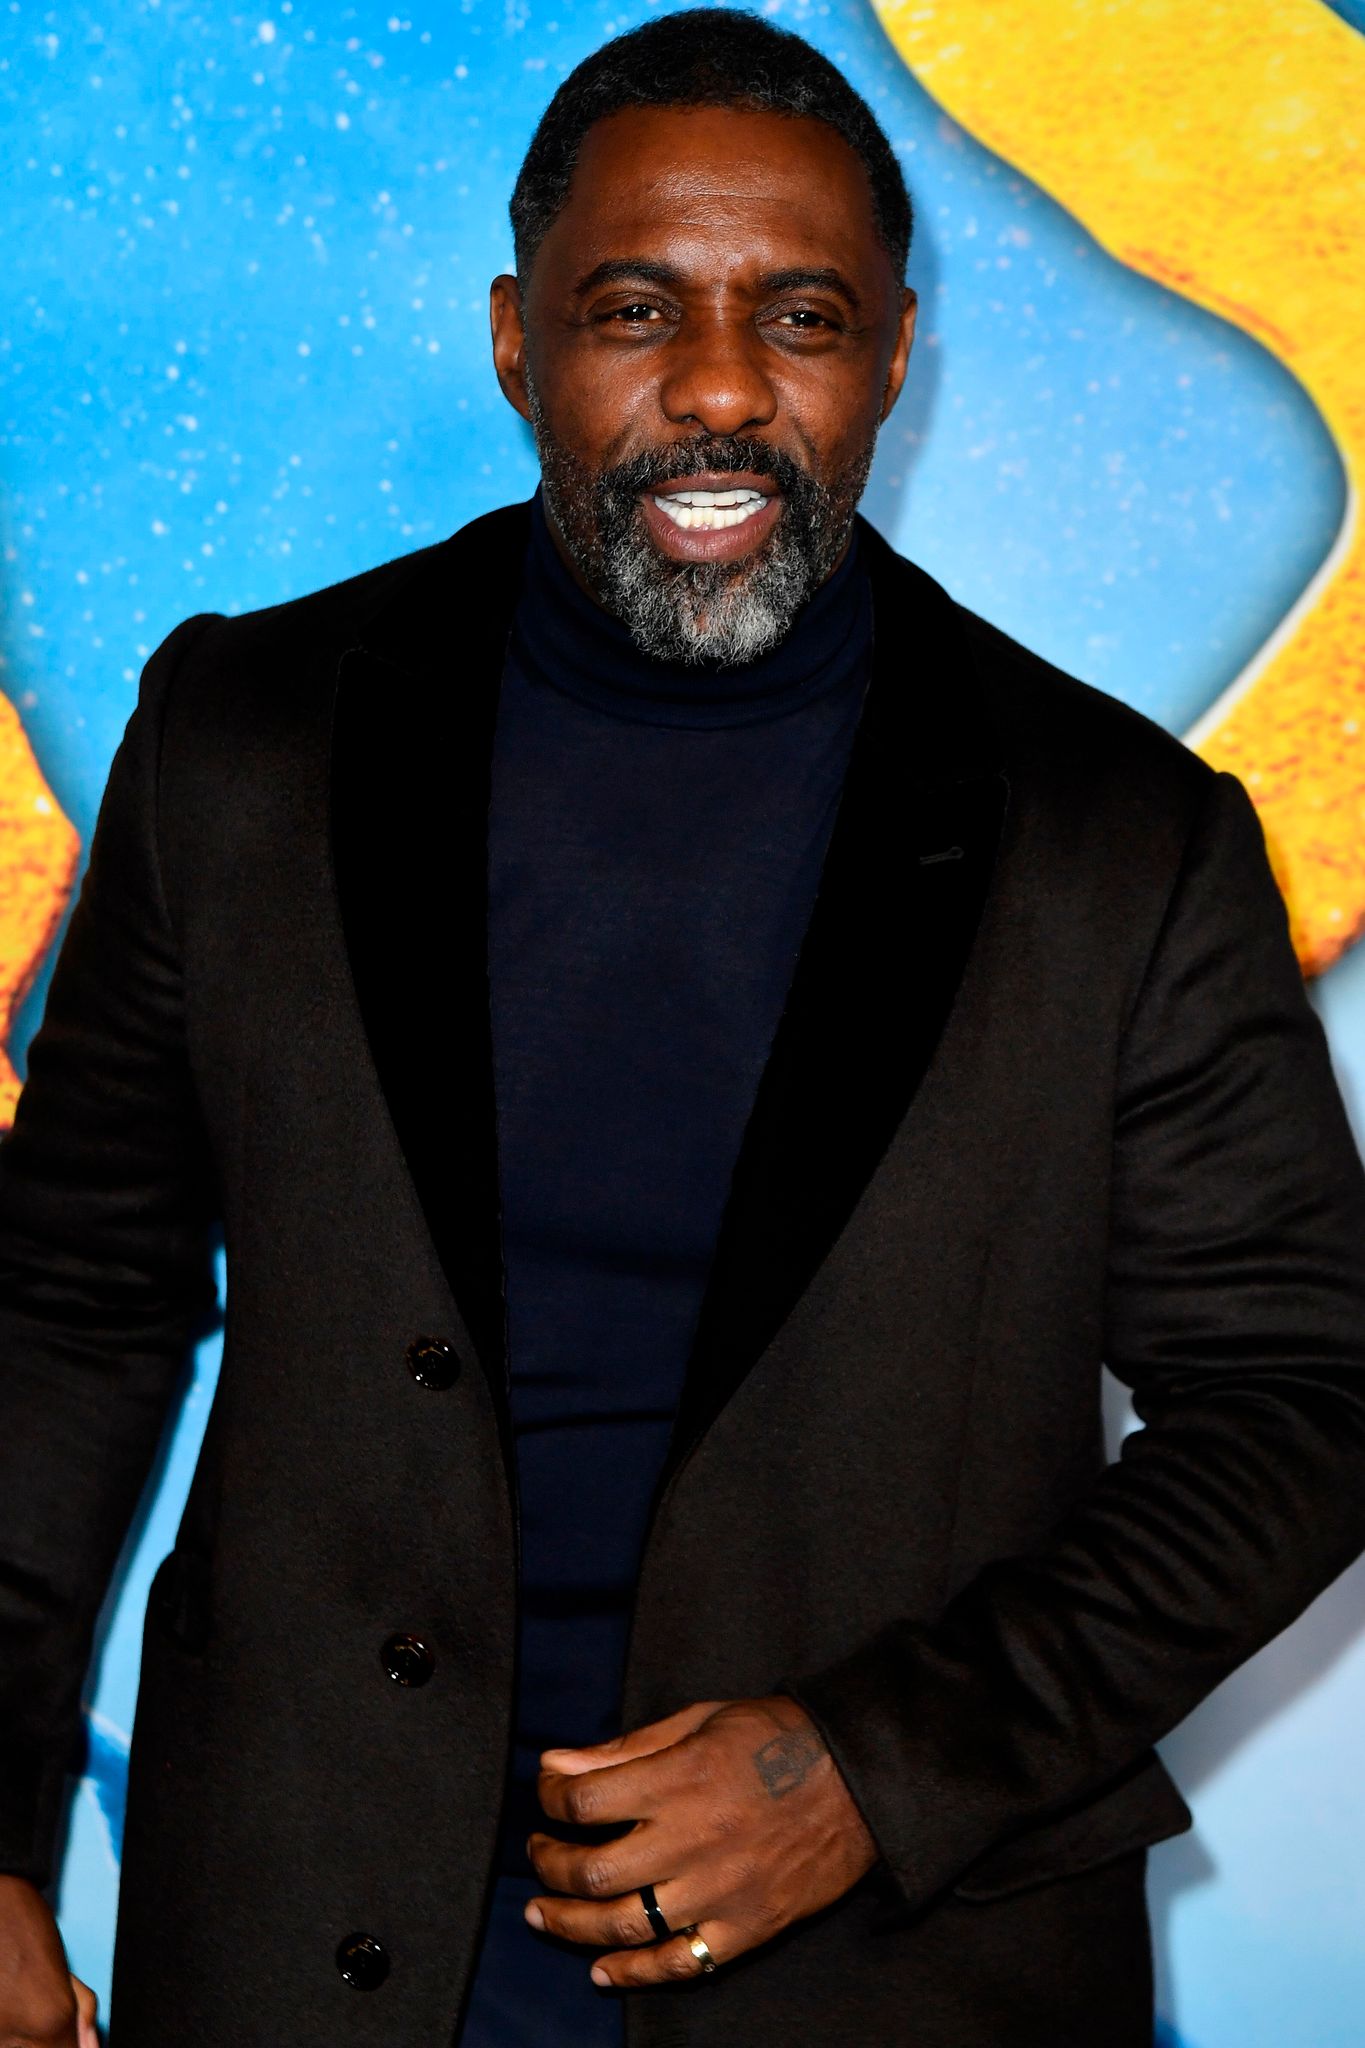 Idris Elba at the premiere of "Cats" in New York City on December 16, 2019. | Photo: Getty Images